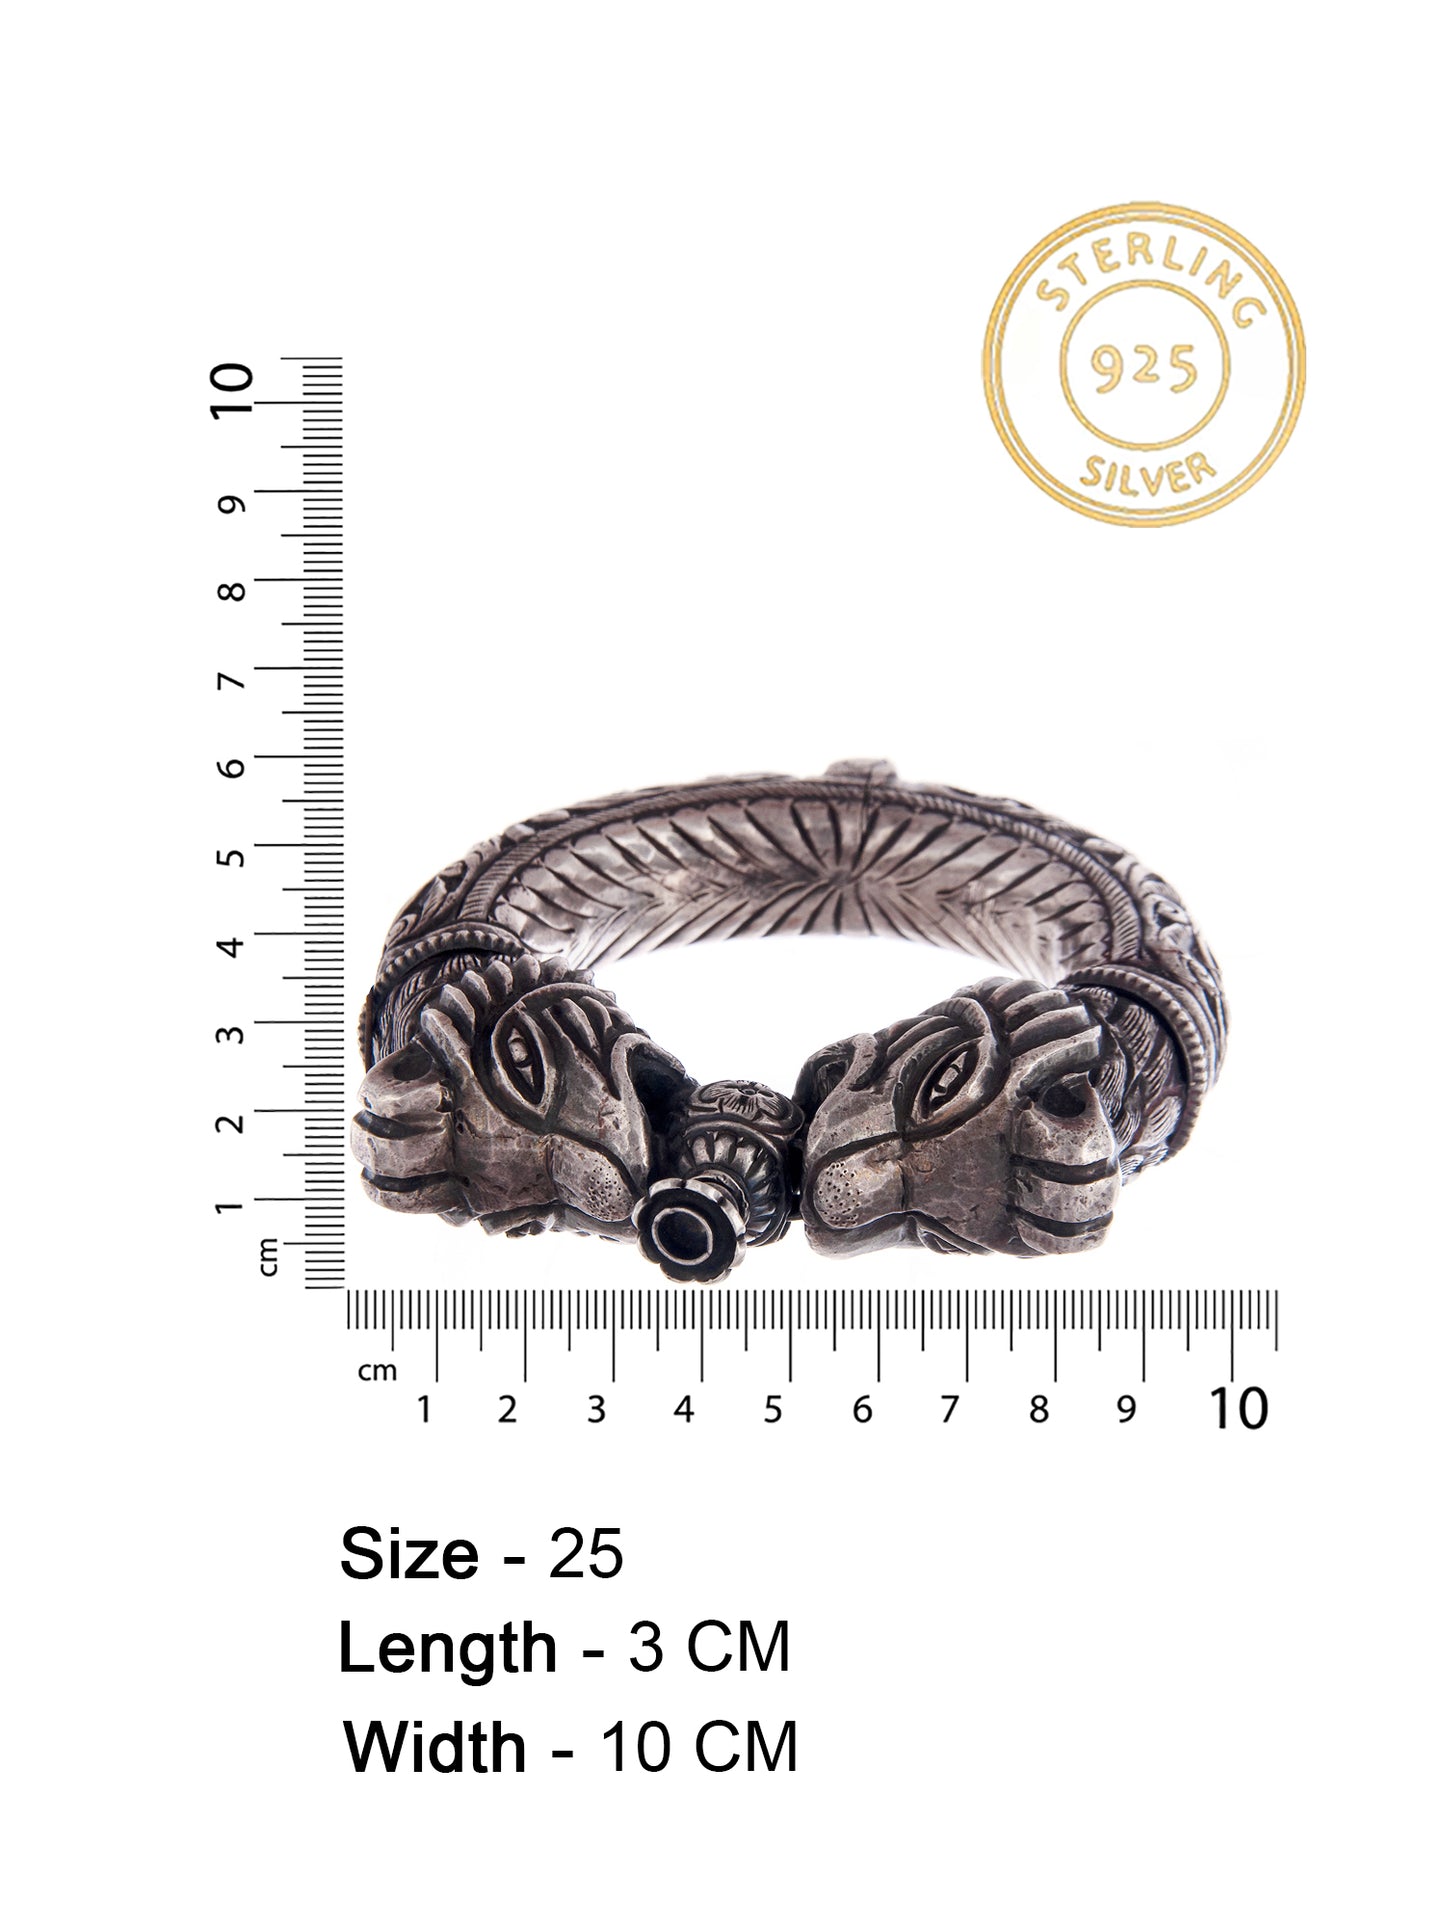 Silver Statement Lion Openable Bangle